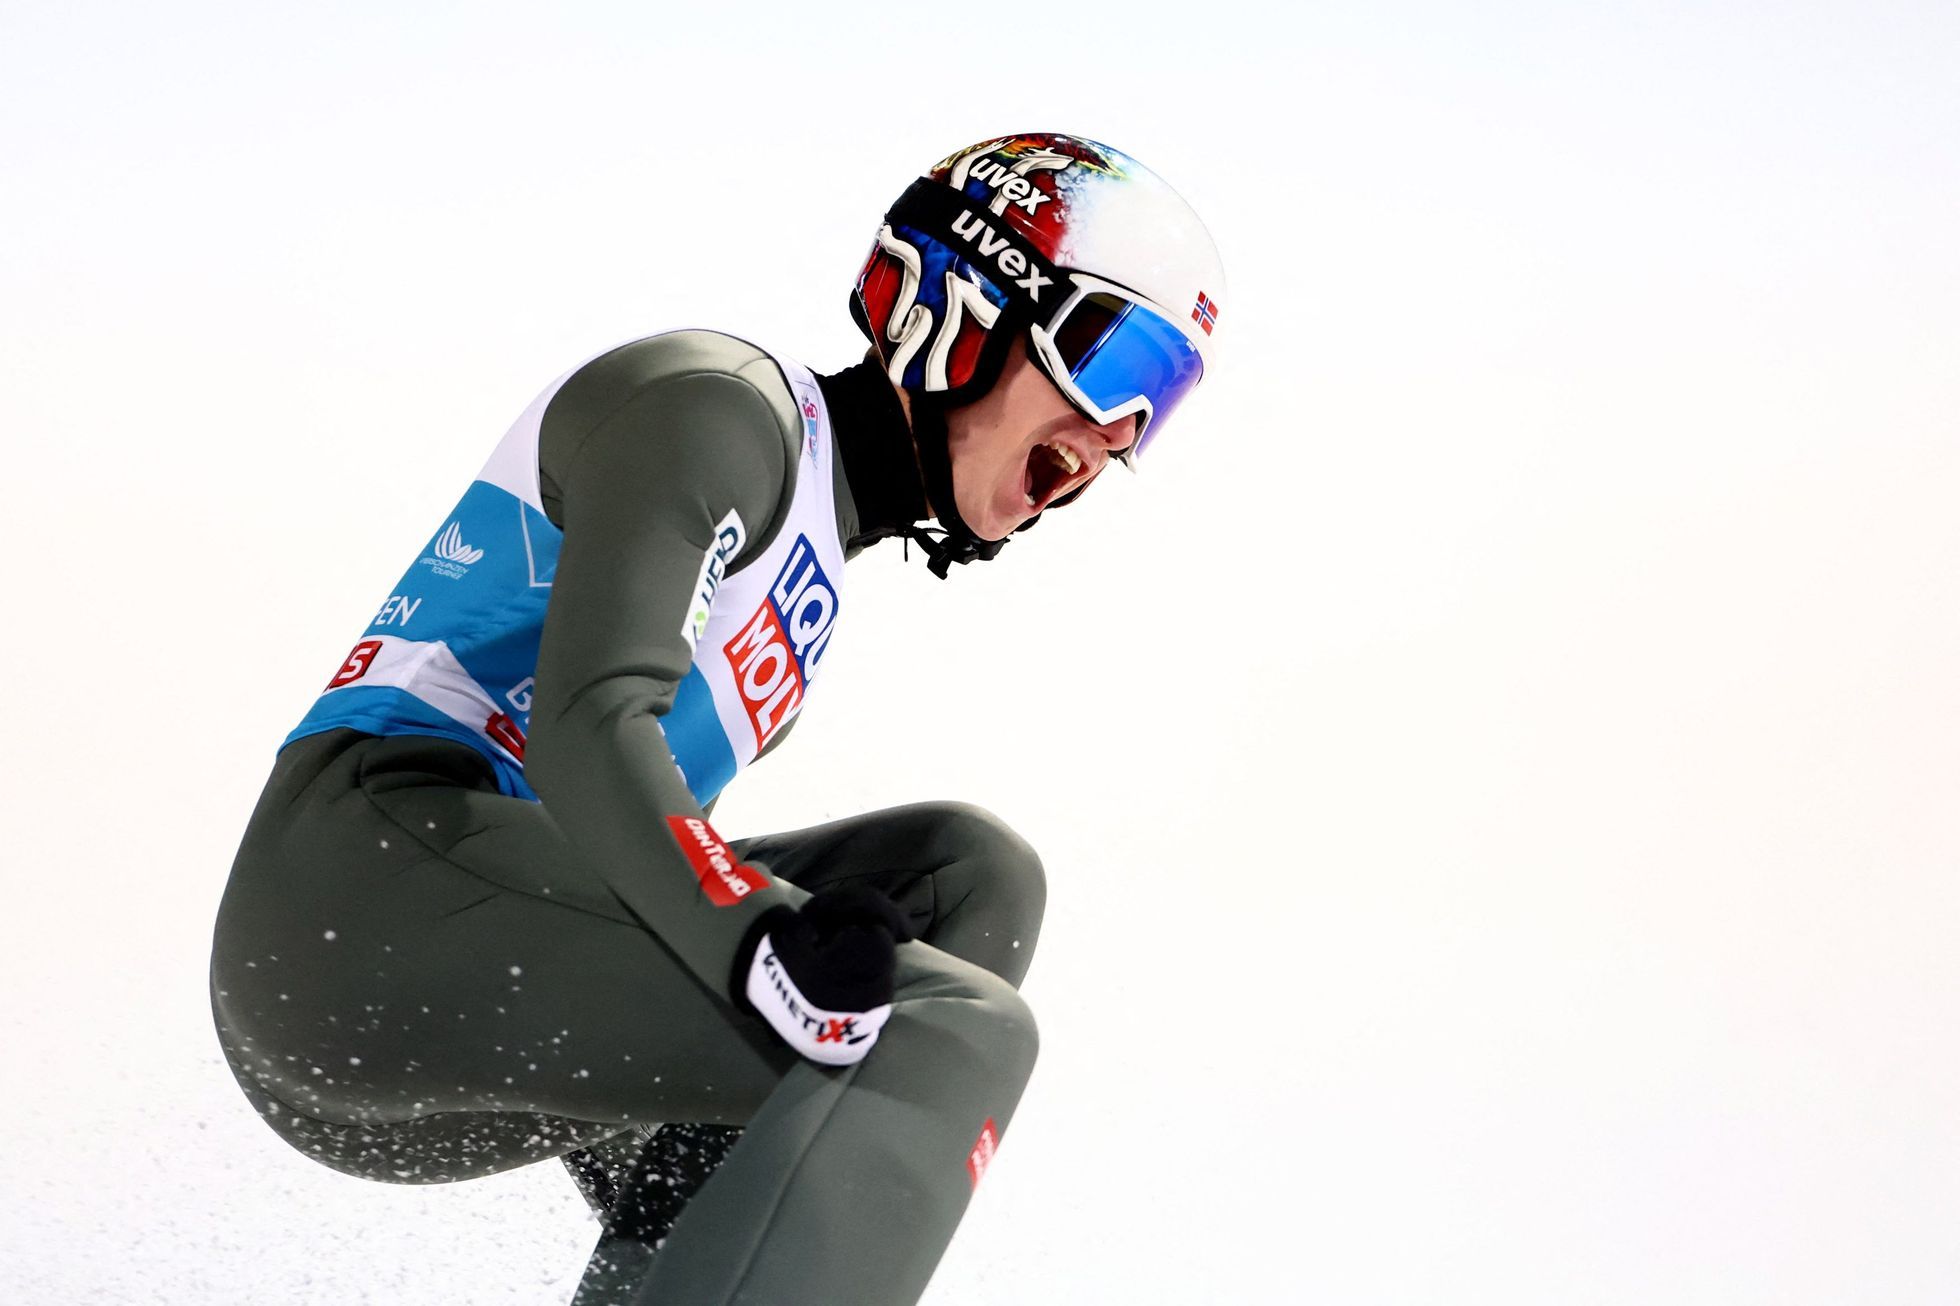 Norwegian ski jumper Granerud is the winner of the World Cup for the second time